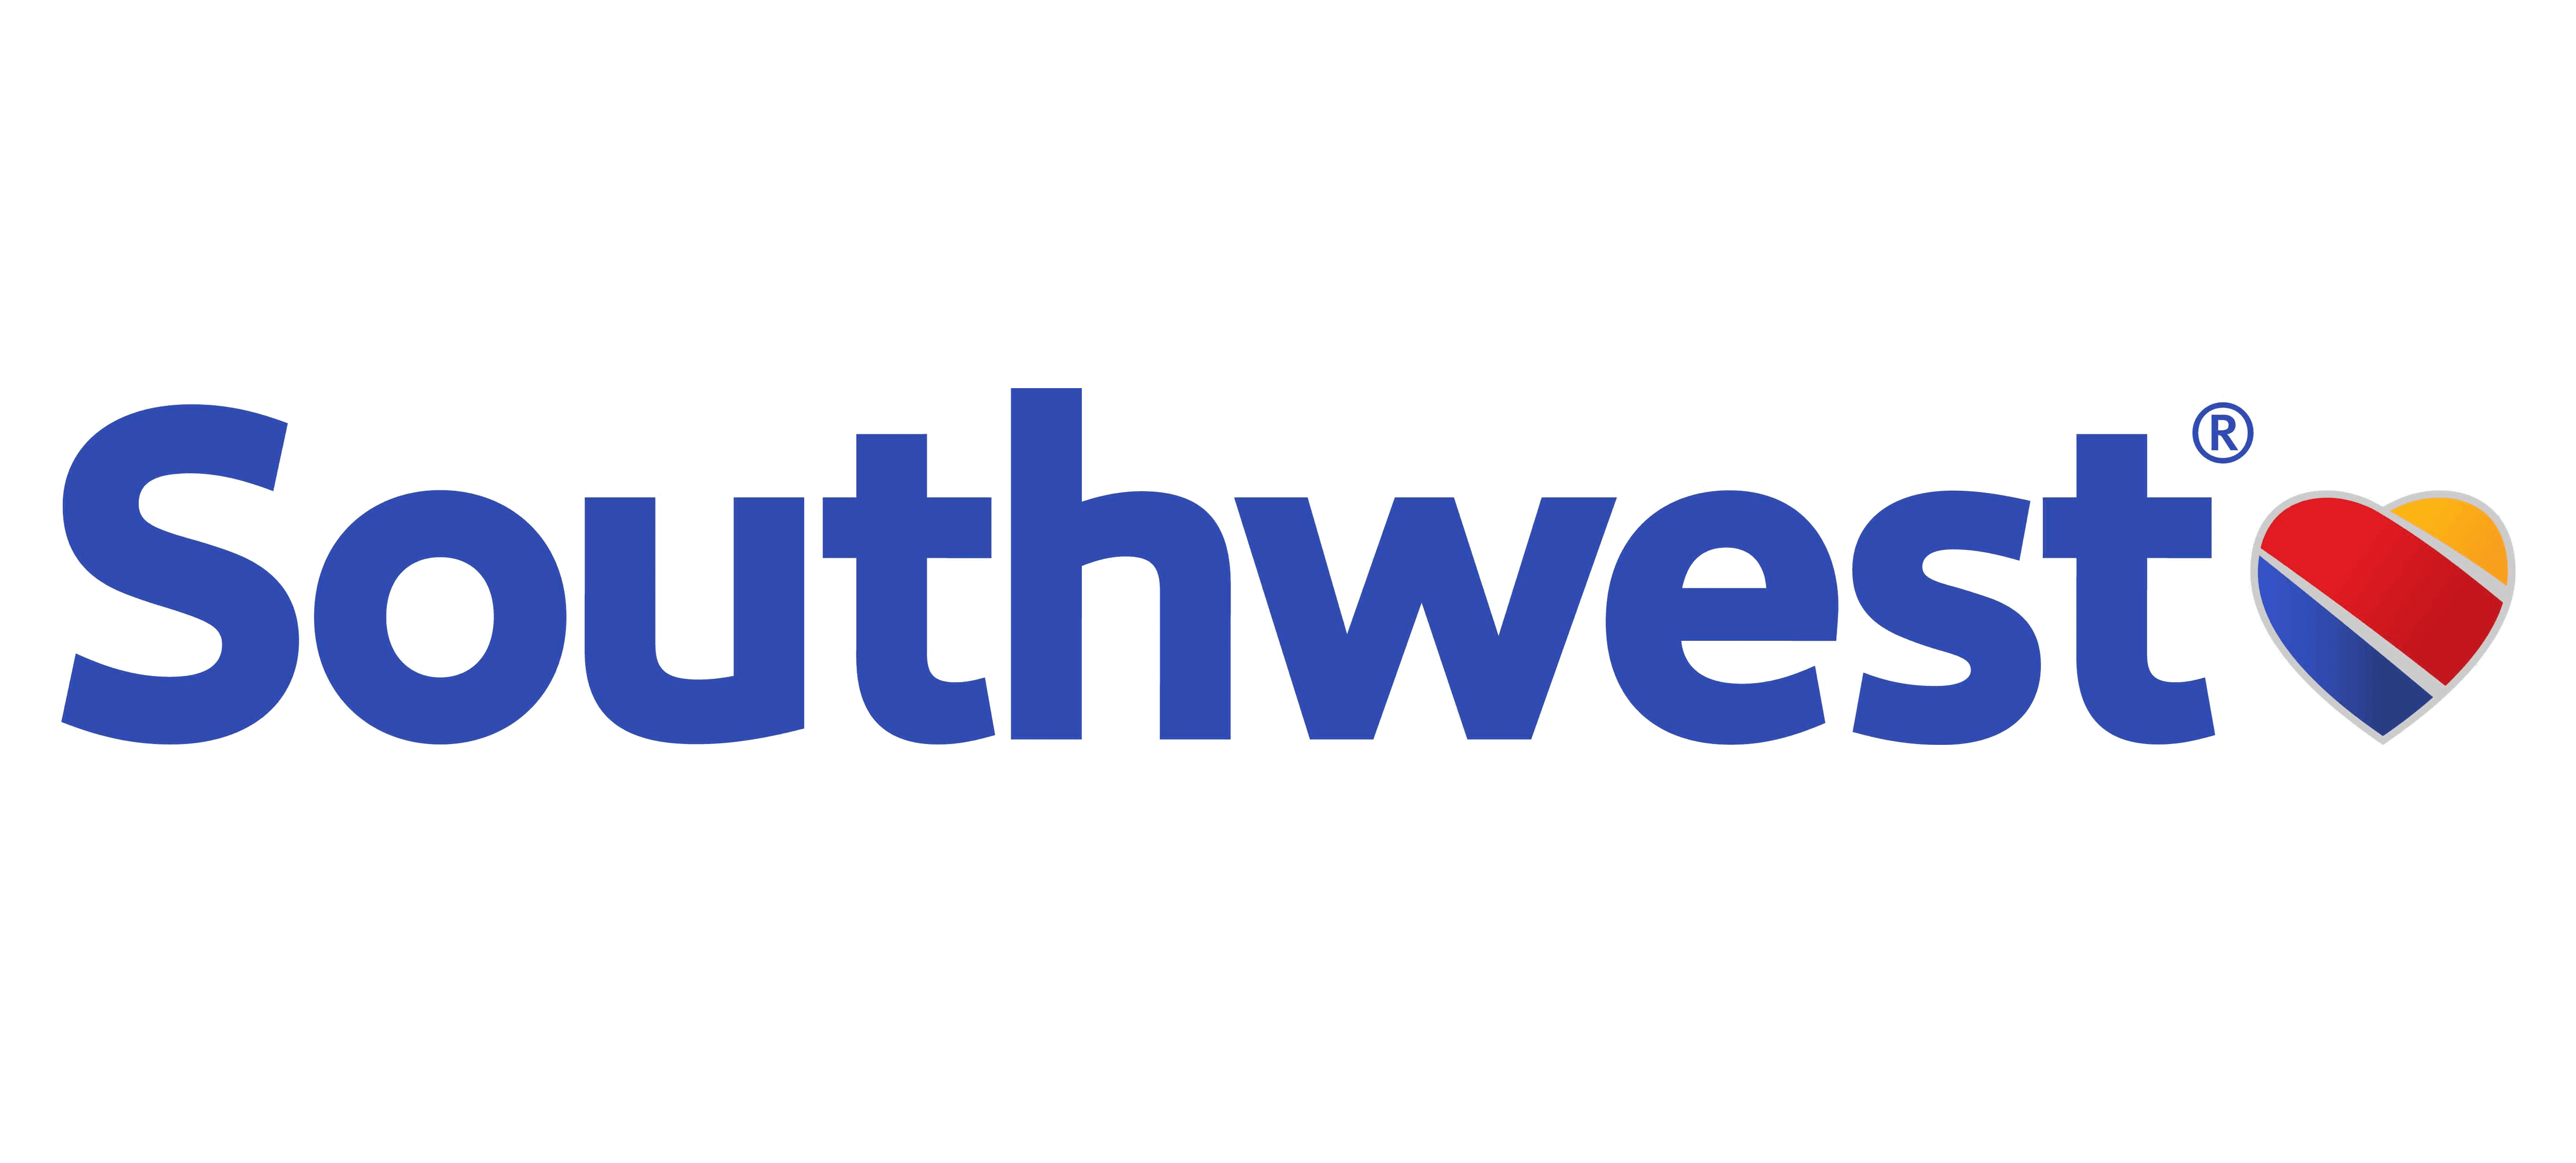 southwest-airlines-logo